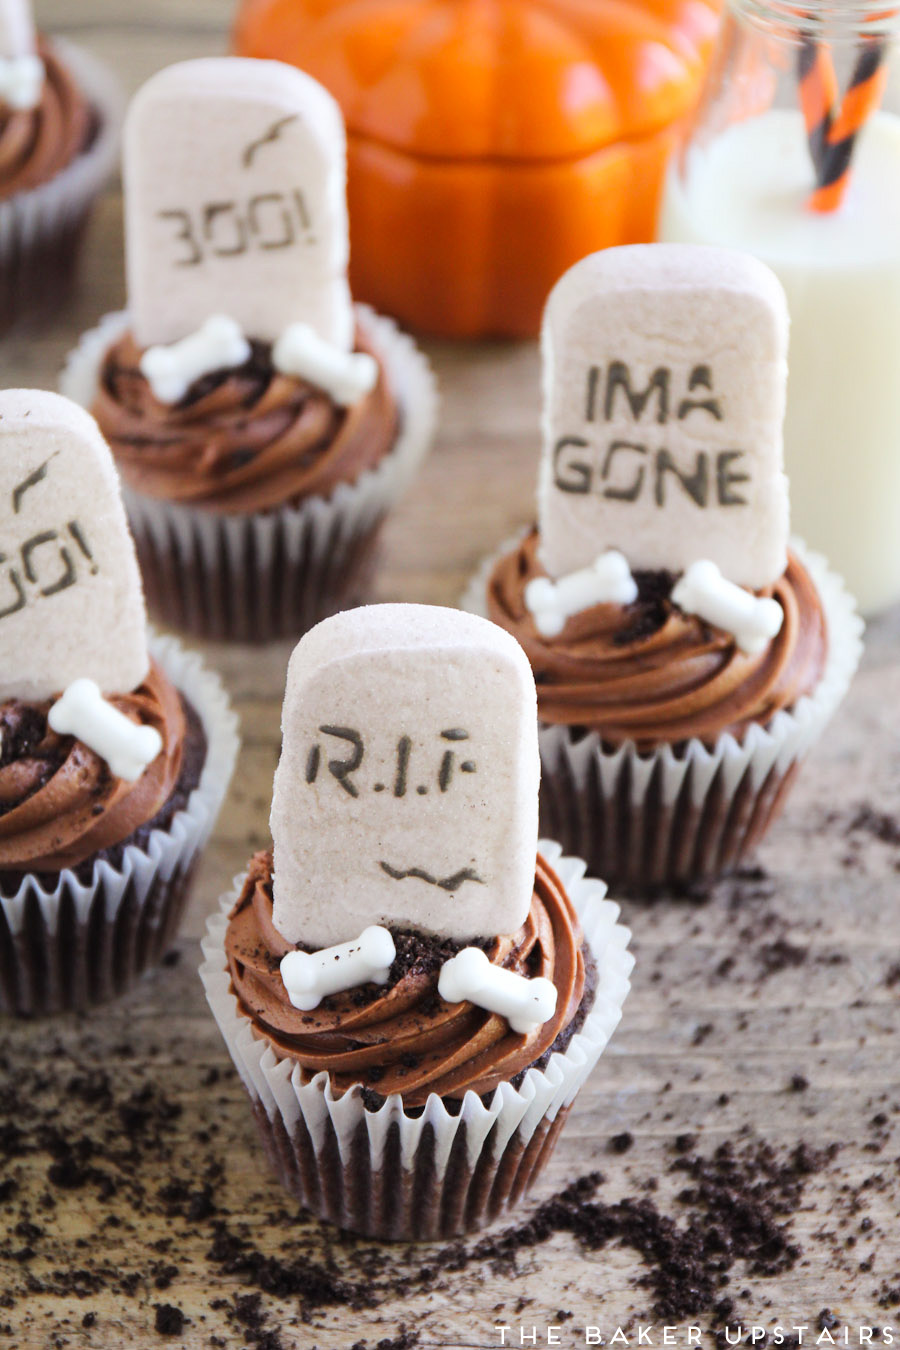 These spooky Halloween cupcakes are so fun to make, and so rich and chocolatey! They're a delicious Halloween dessert!